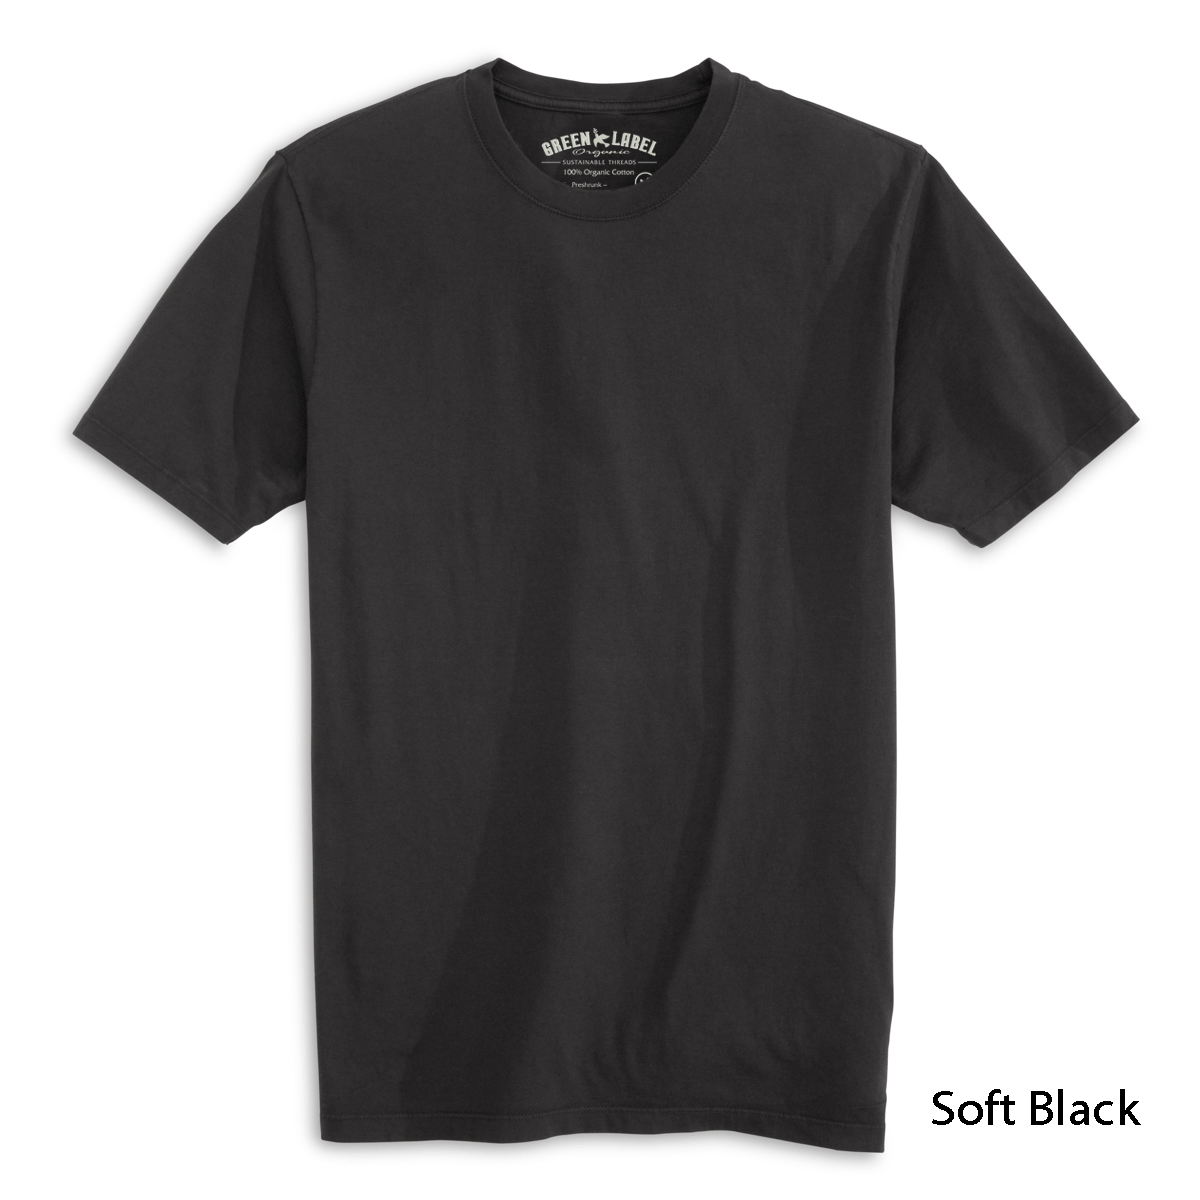 https://cdn9.bigcommerce.com/s-e6hs92zf/products/744/images/5391/Solid-Mens-Crew-Soft-Black__81468.1703269923.1280.1280.gif?c=2